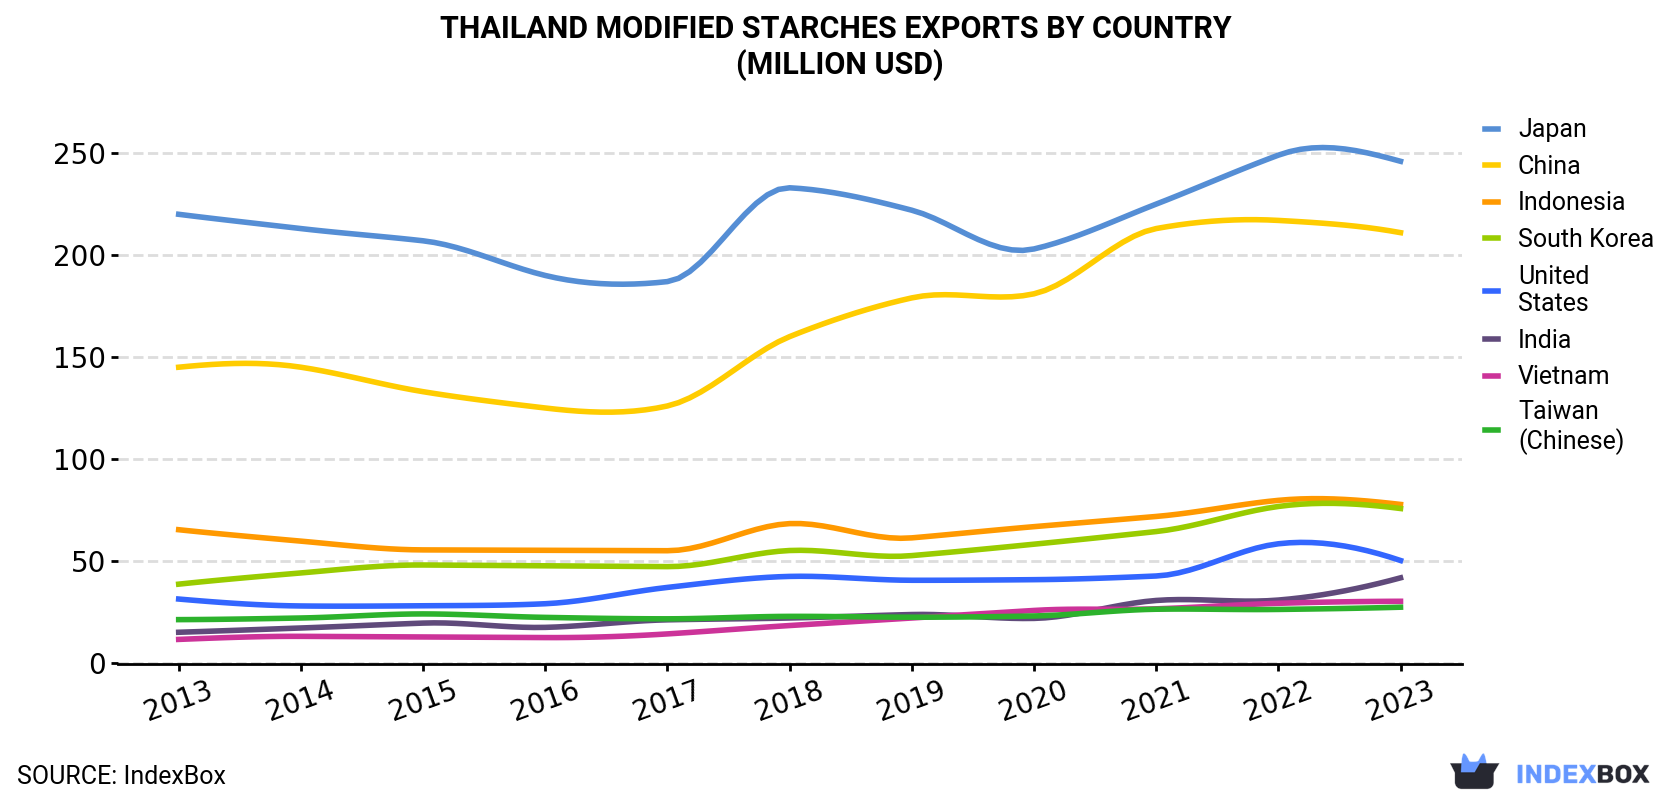 Thailand Modified Starches Exports By Country (Million USD)